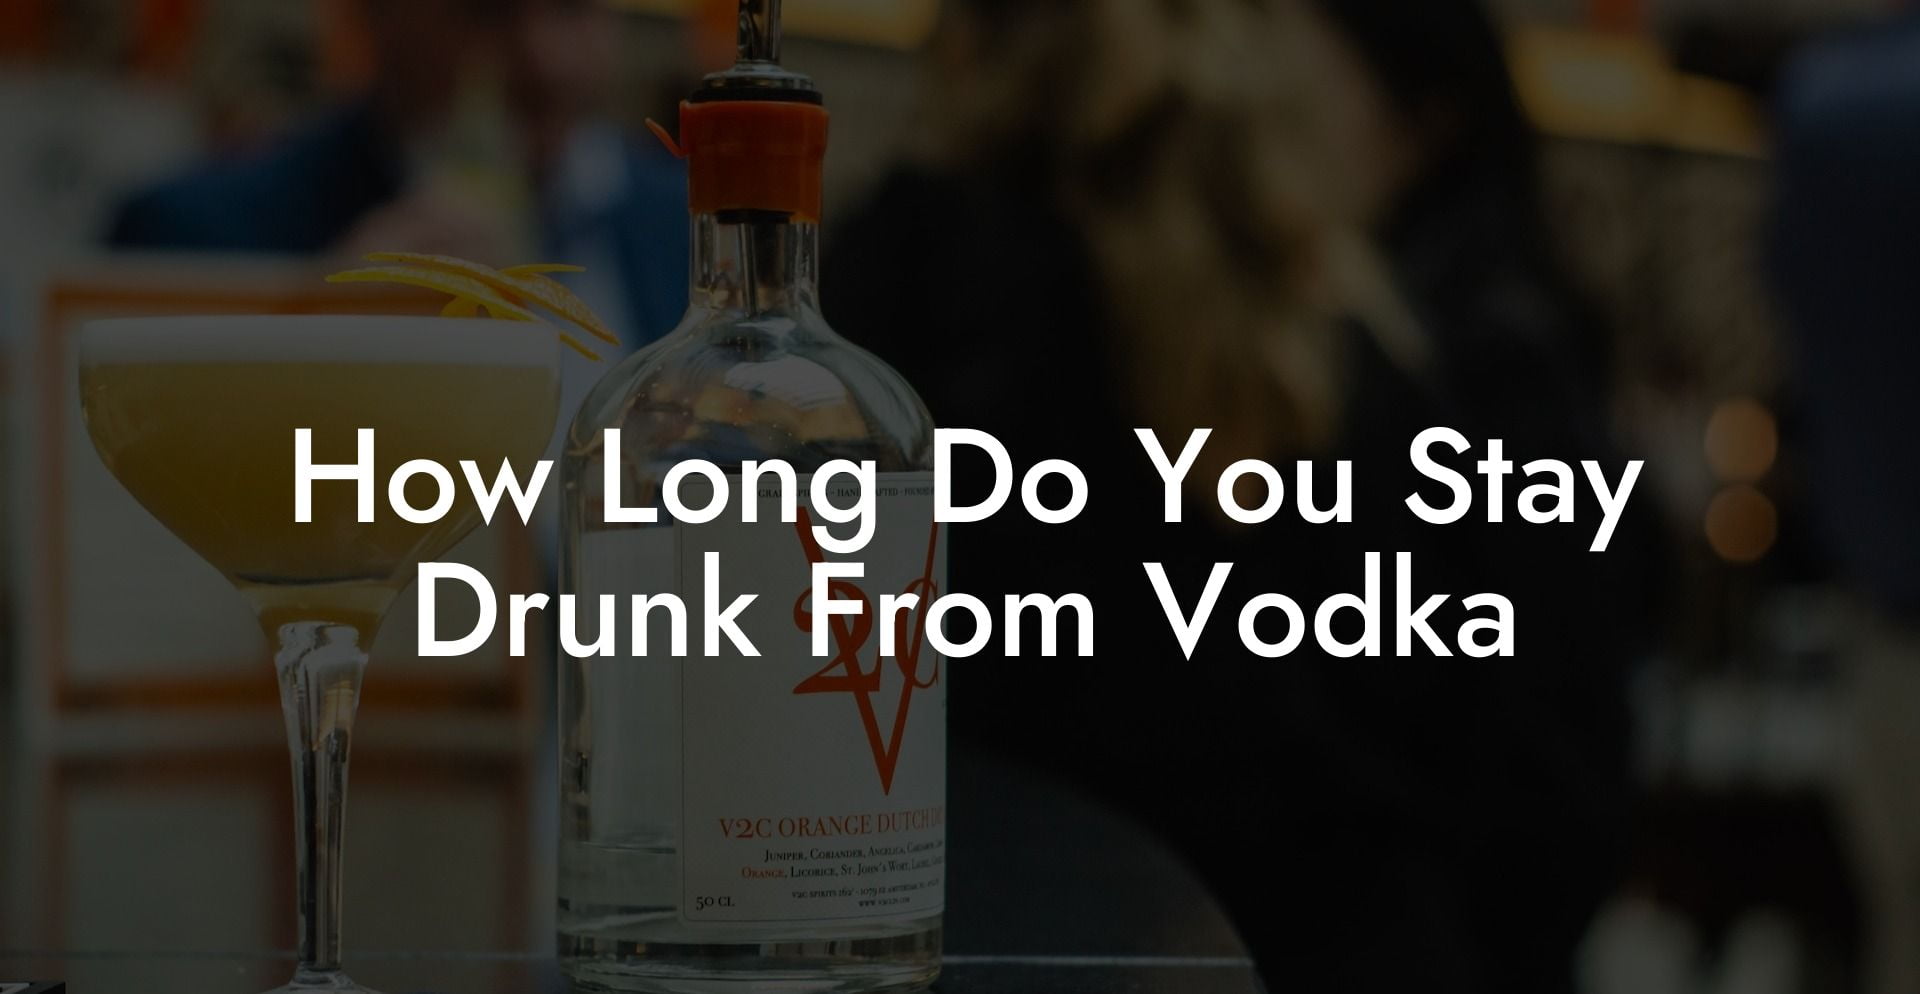 How Long Do You Stay Drunk From Vodka